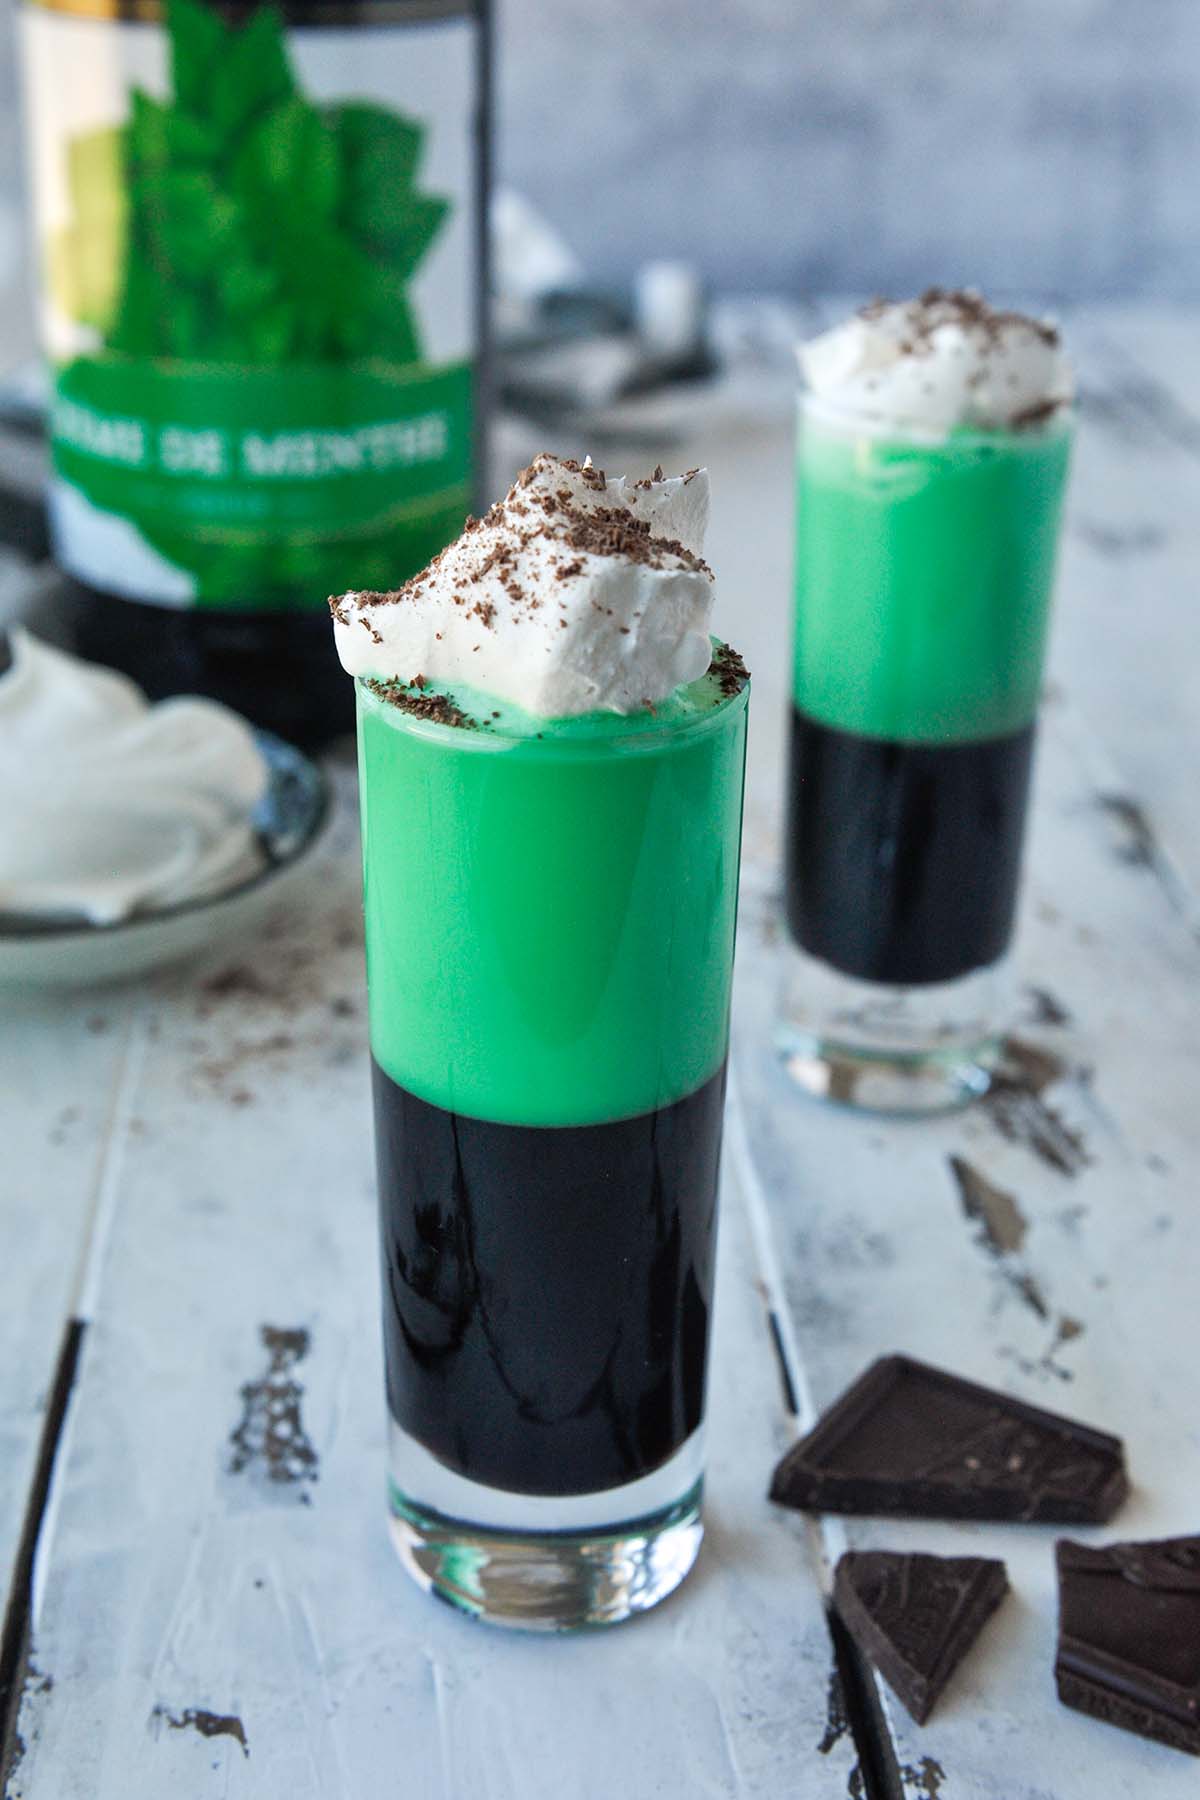 Two grasshopper shots topped with whipped cream and chocolate shavings with a bottle of Creme de menthe.